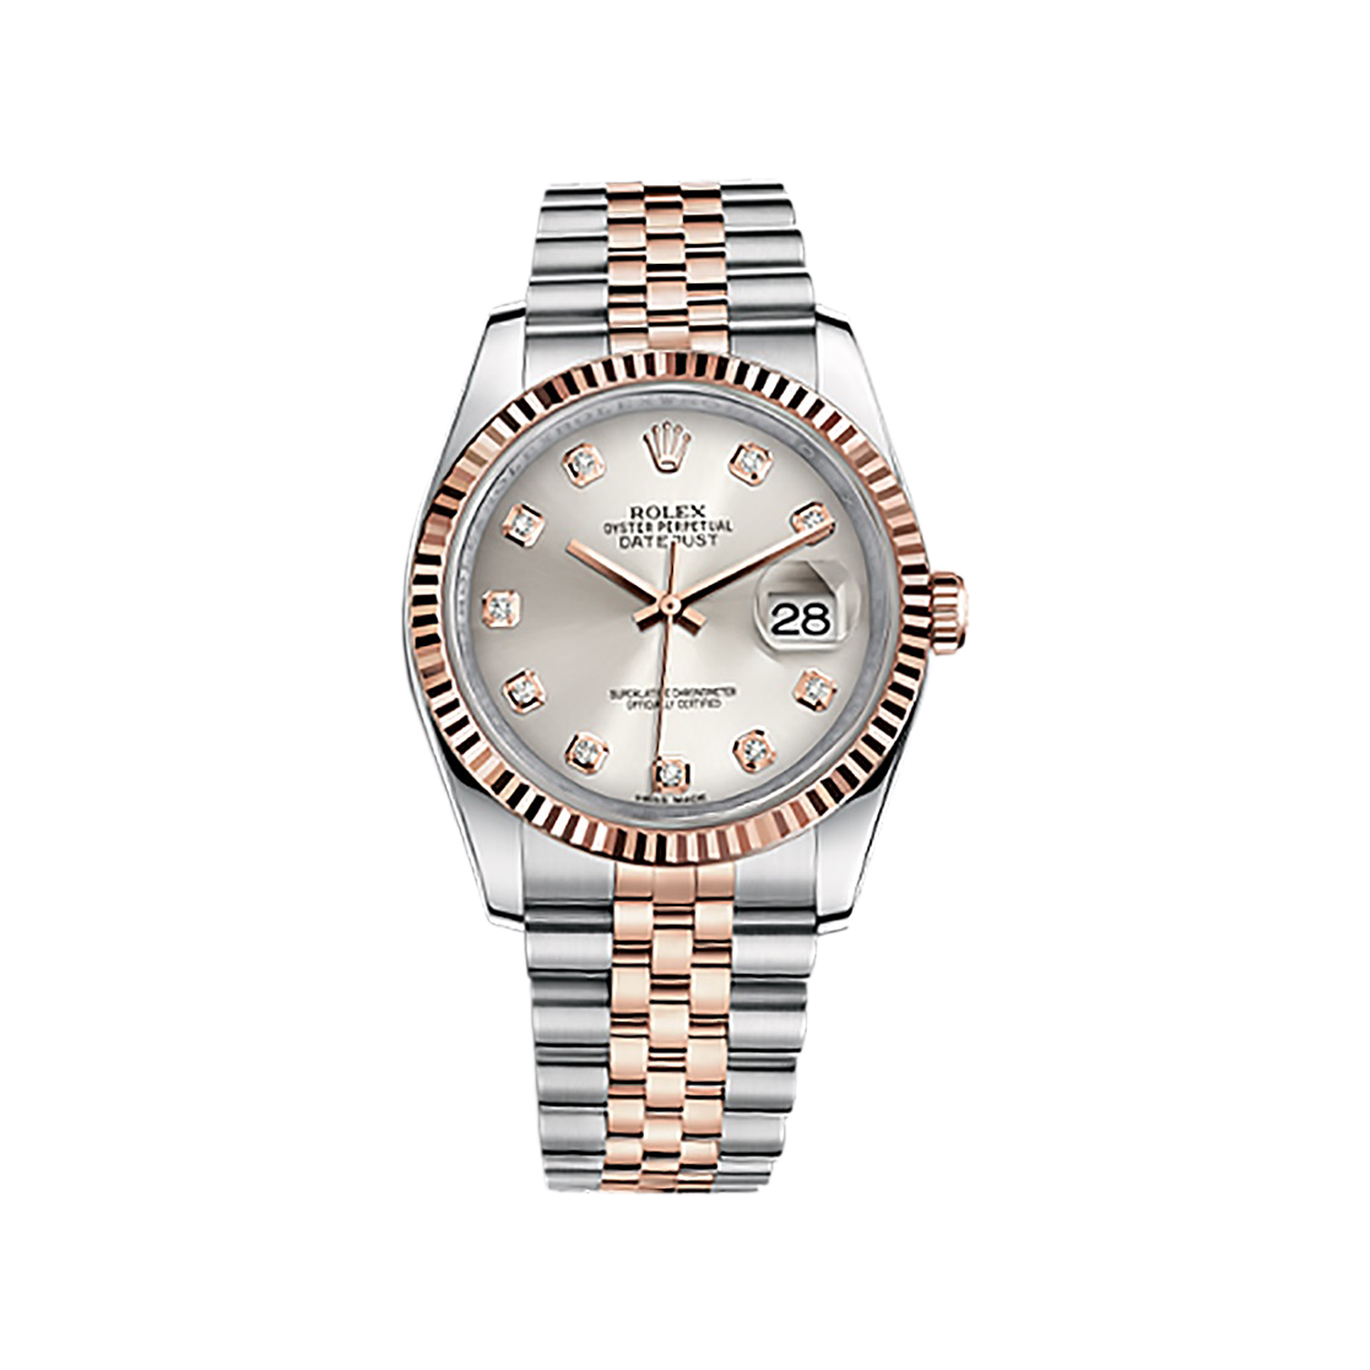 Datejust 36 116231 Rose Gold & Stainless Steel Watch (Silver Set with Diamonds)